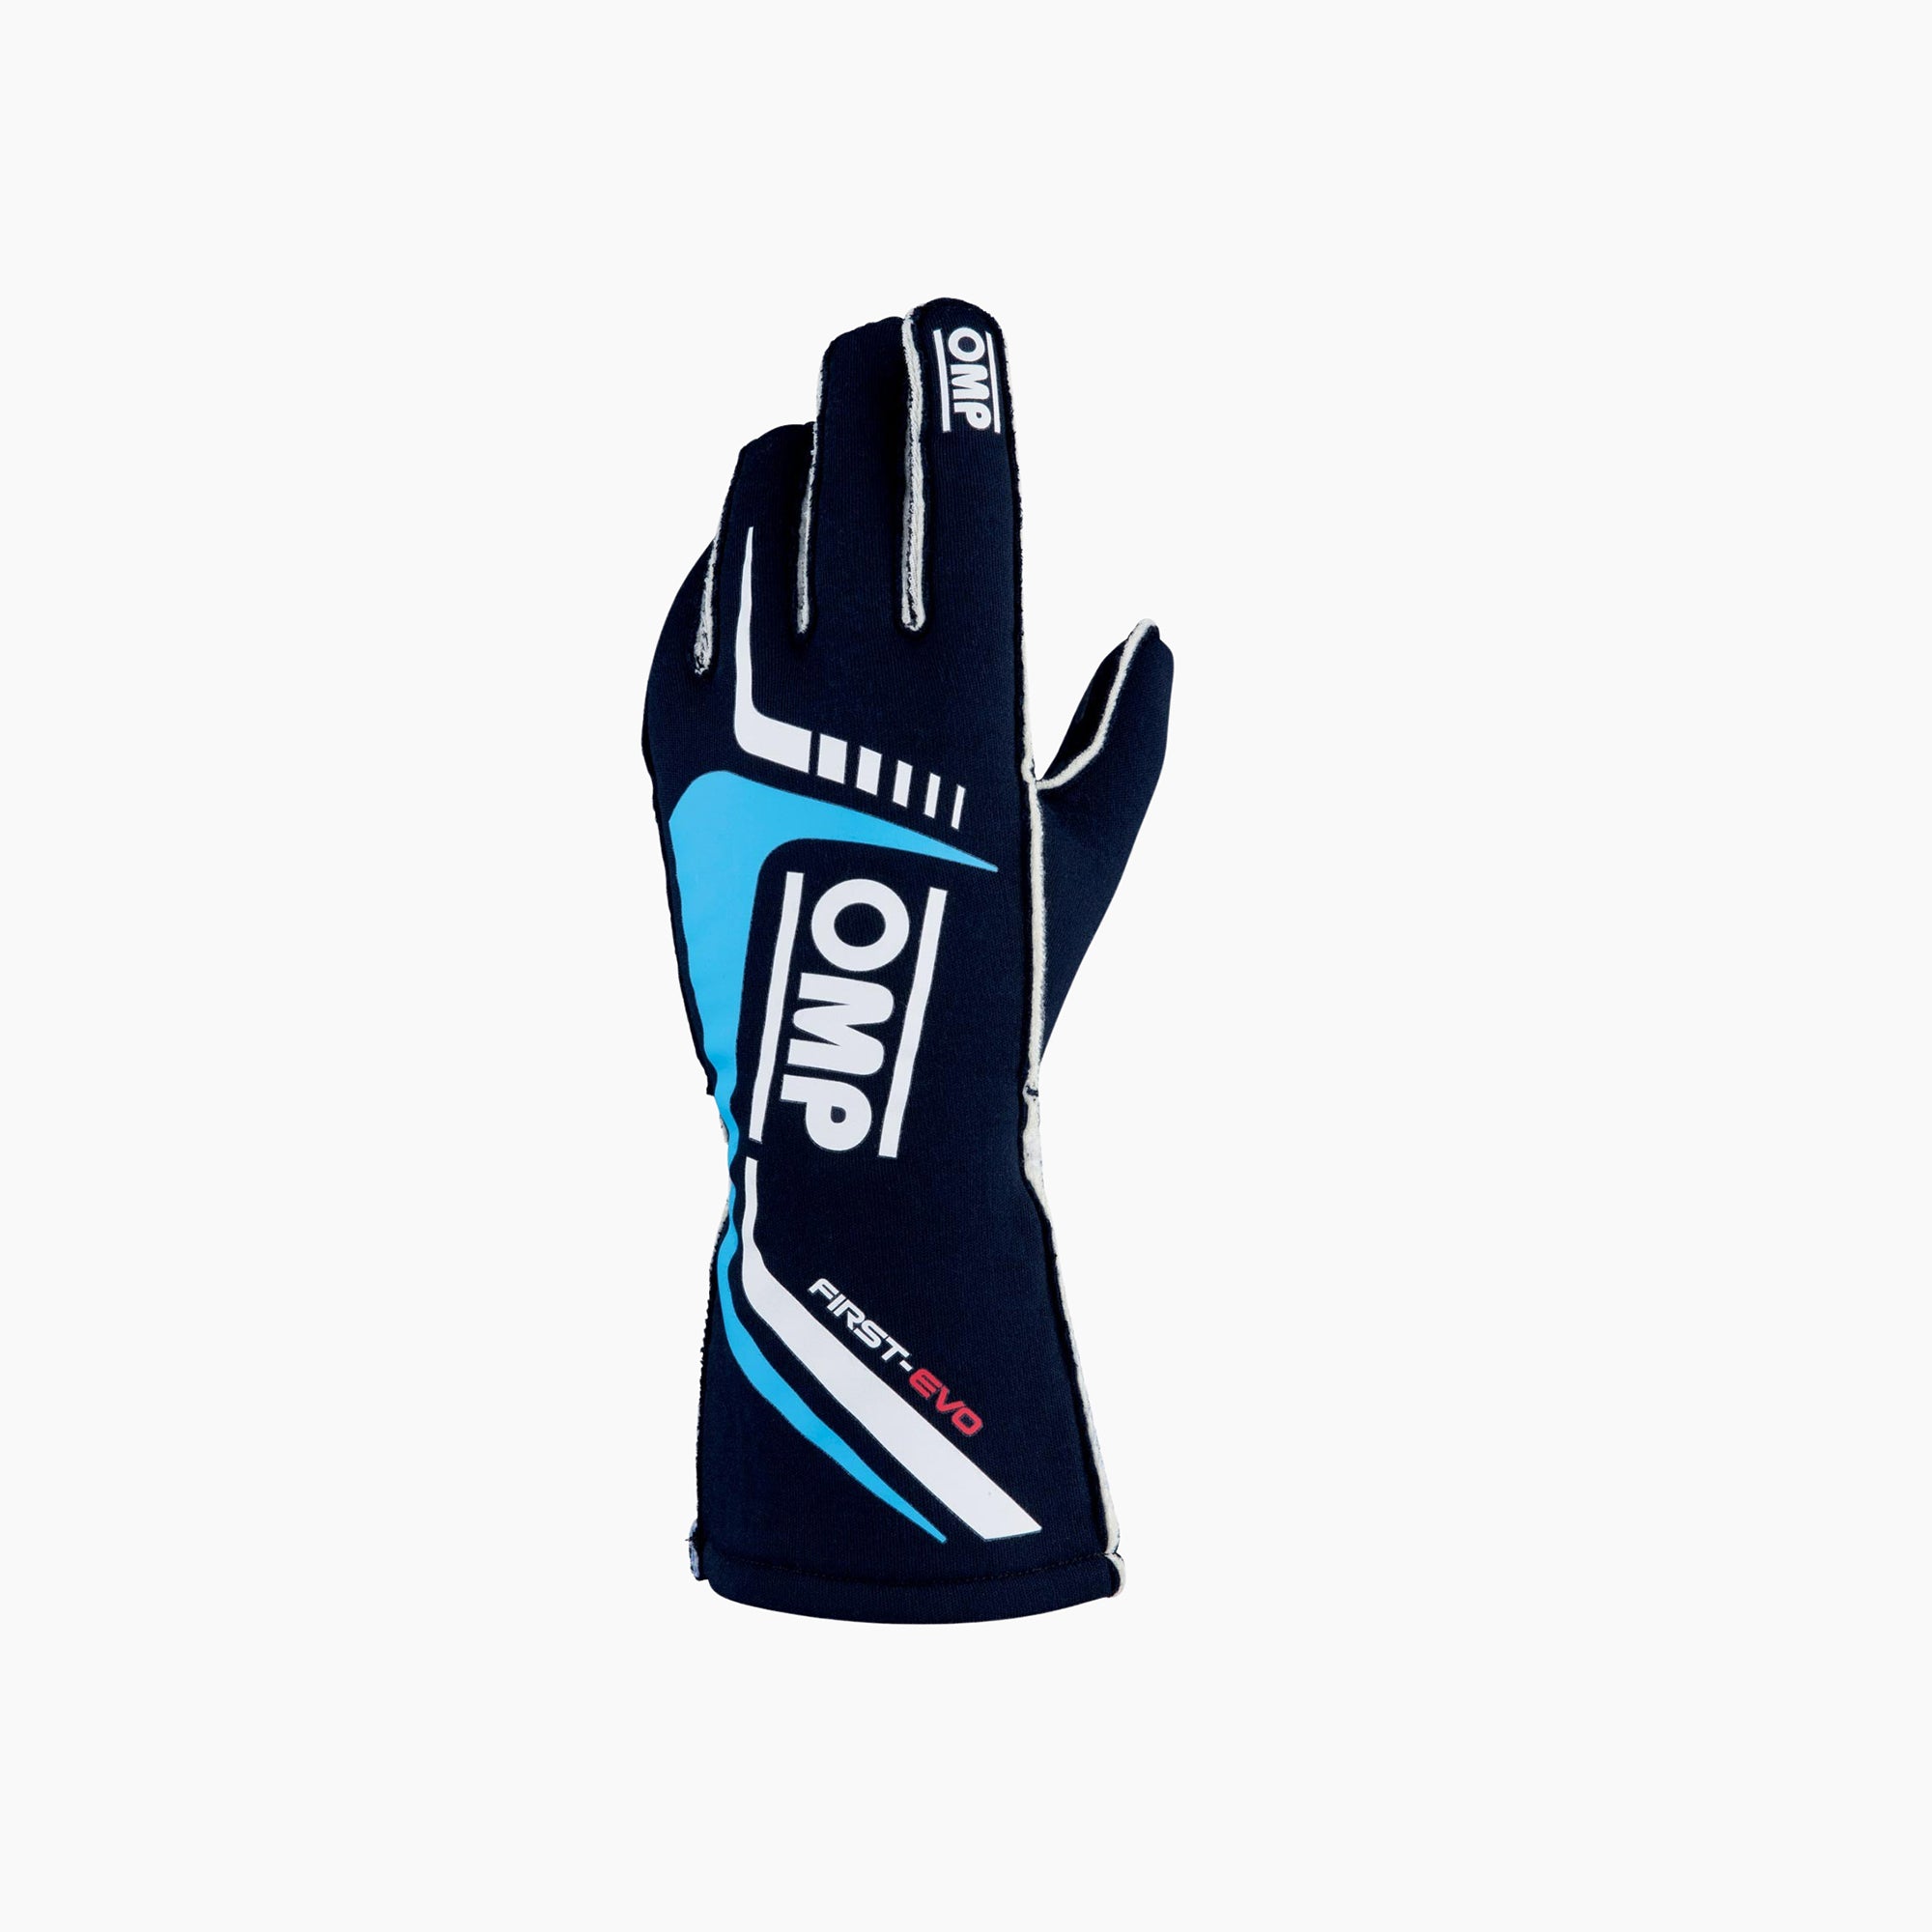 OMP | First EVO Racing Gloves-Racing Gloves-OMP-gpx-store